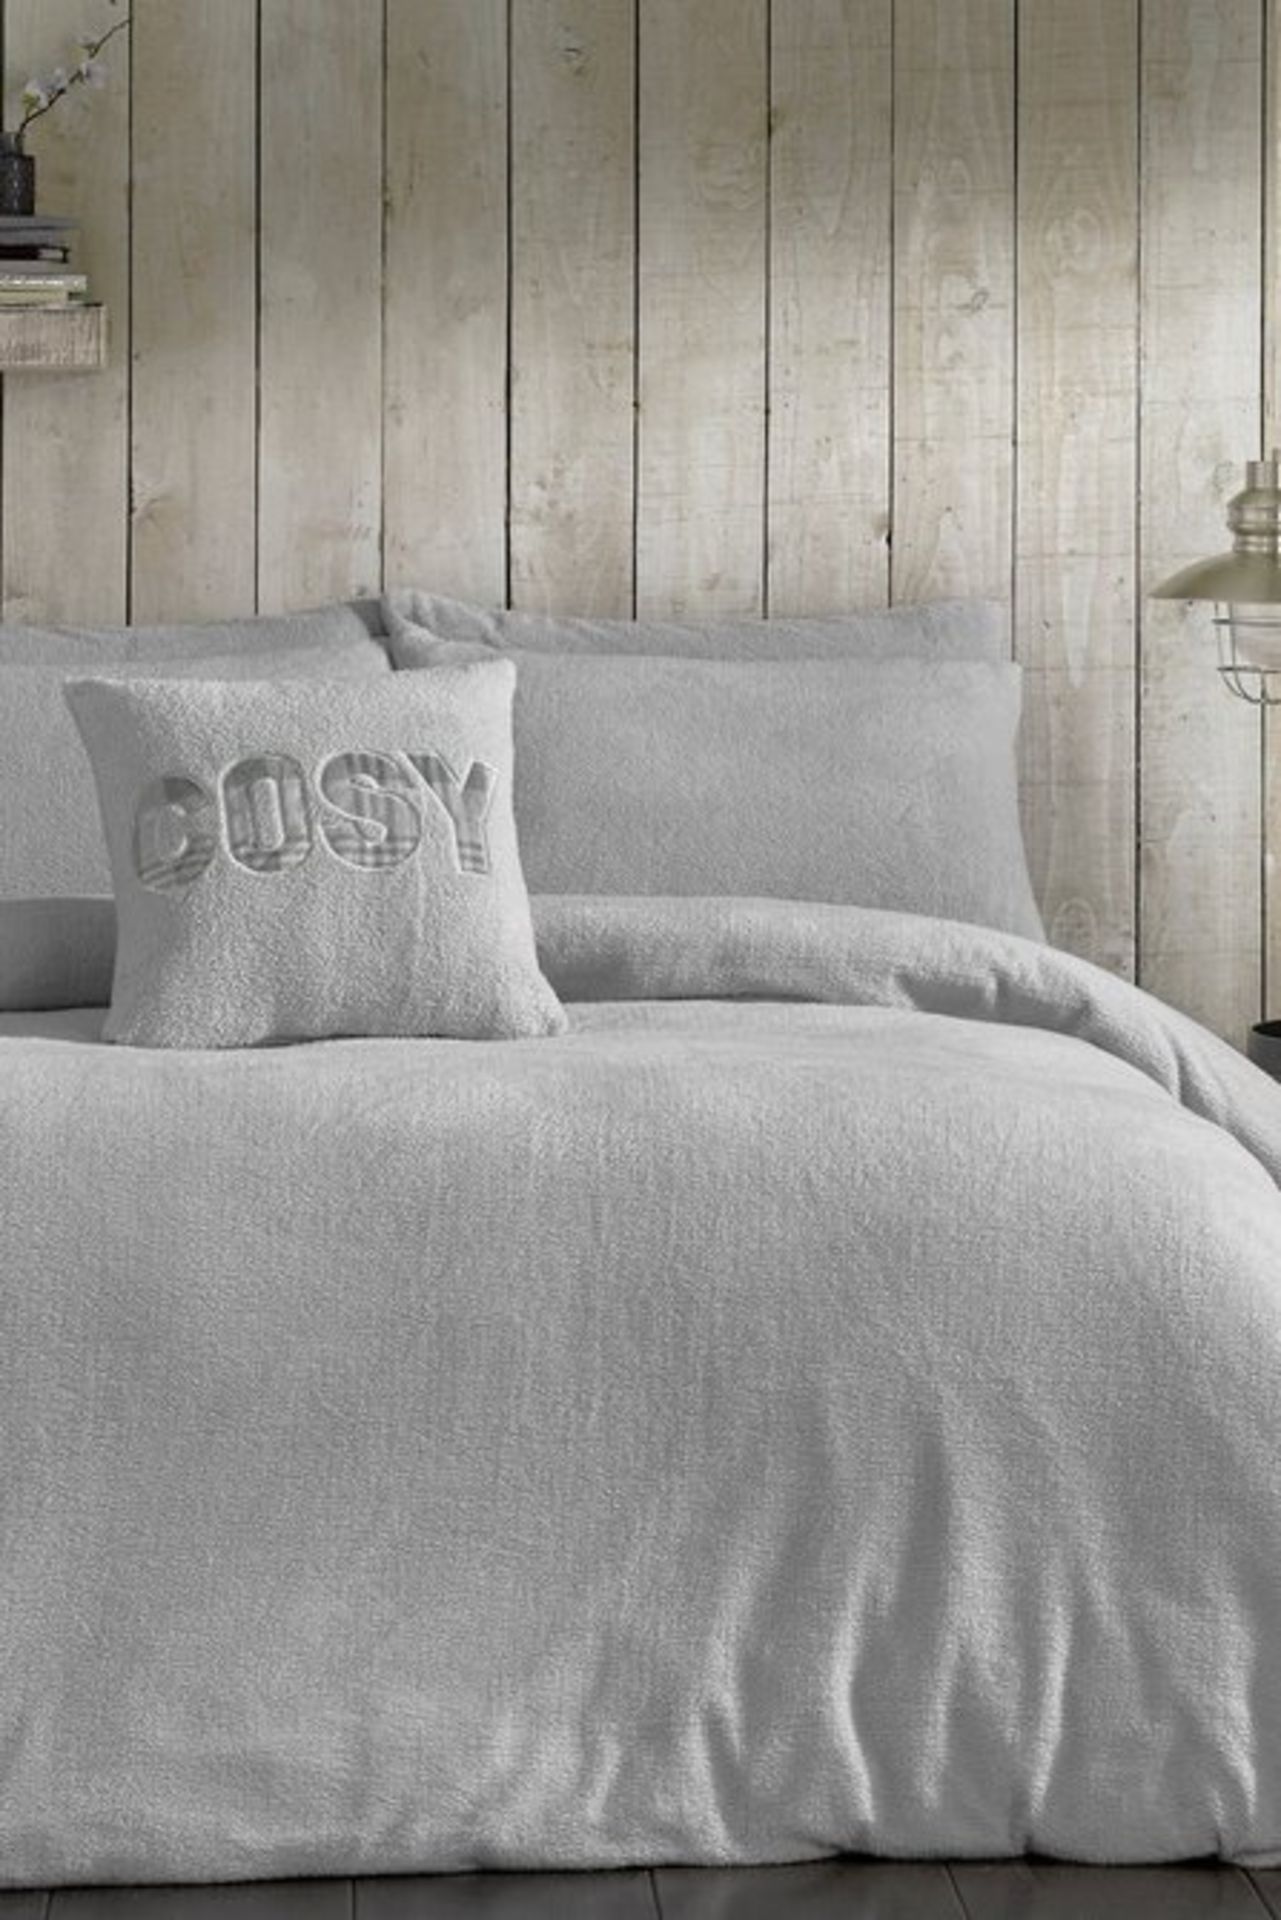 1 BAGGED COSY TEDDY FITTED SHEET IN SILVER GREY / SIZE: SINGLE / RRP £26.99 (PUBLIC VIEWING